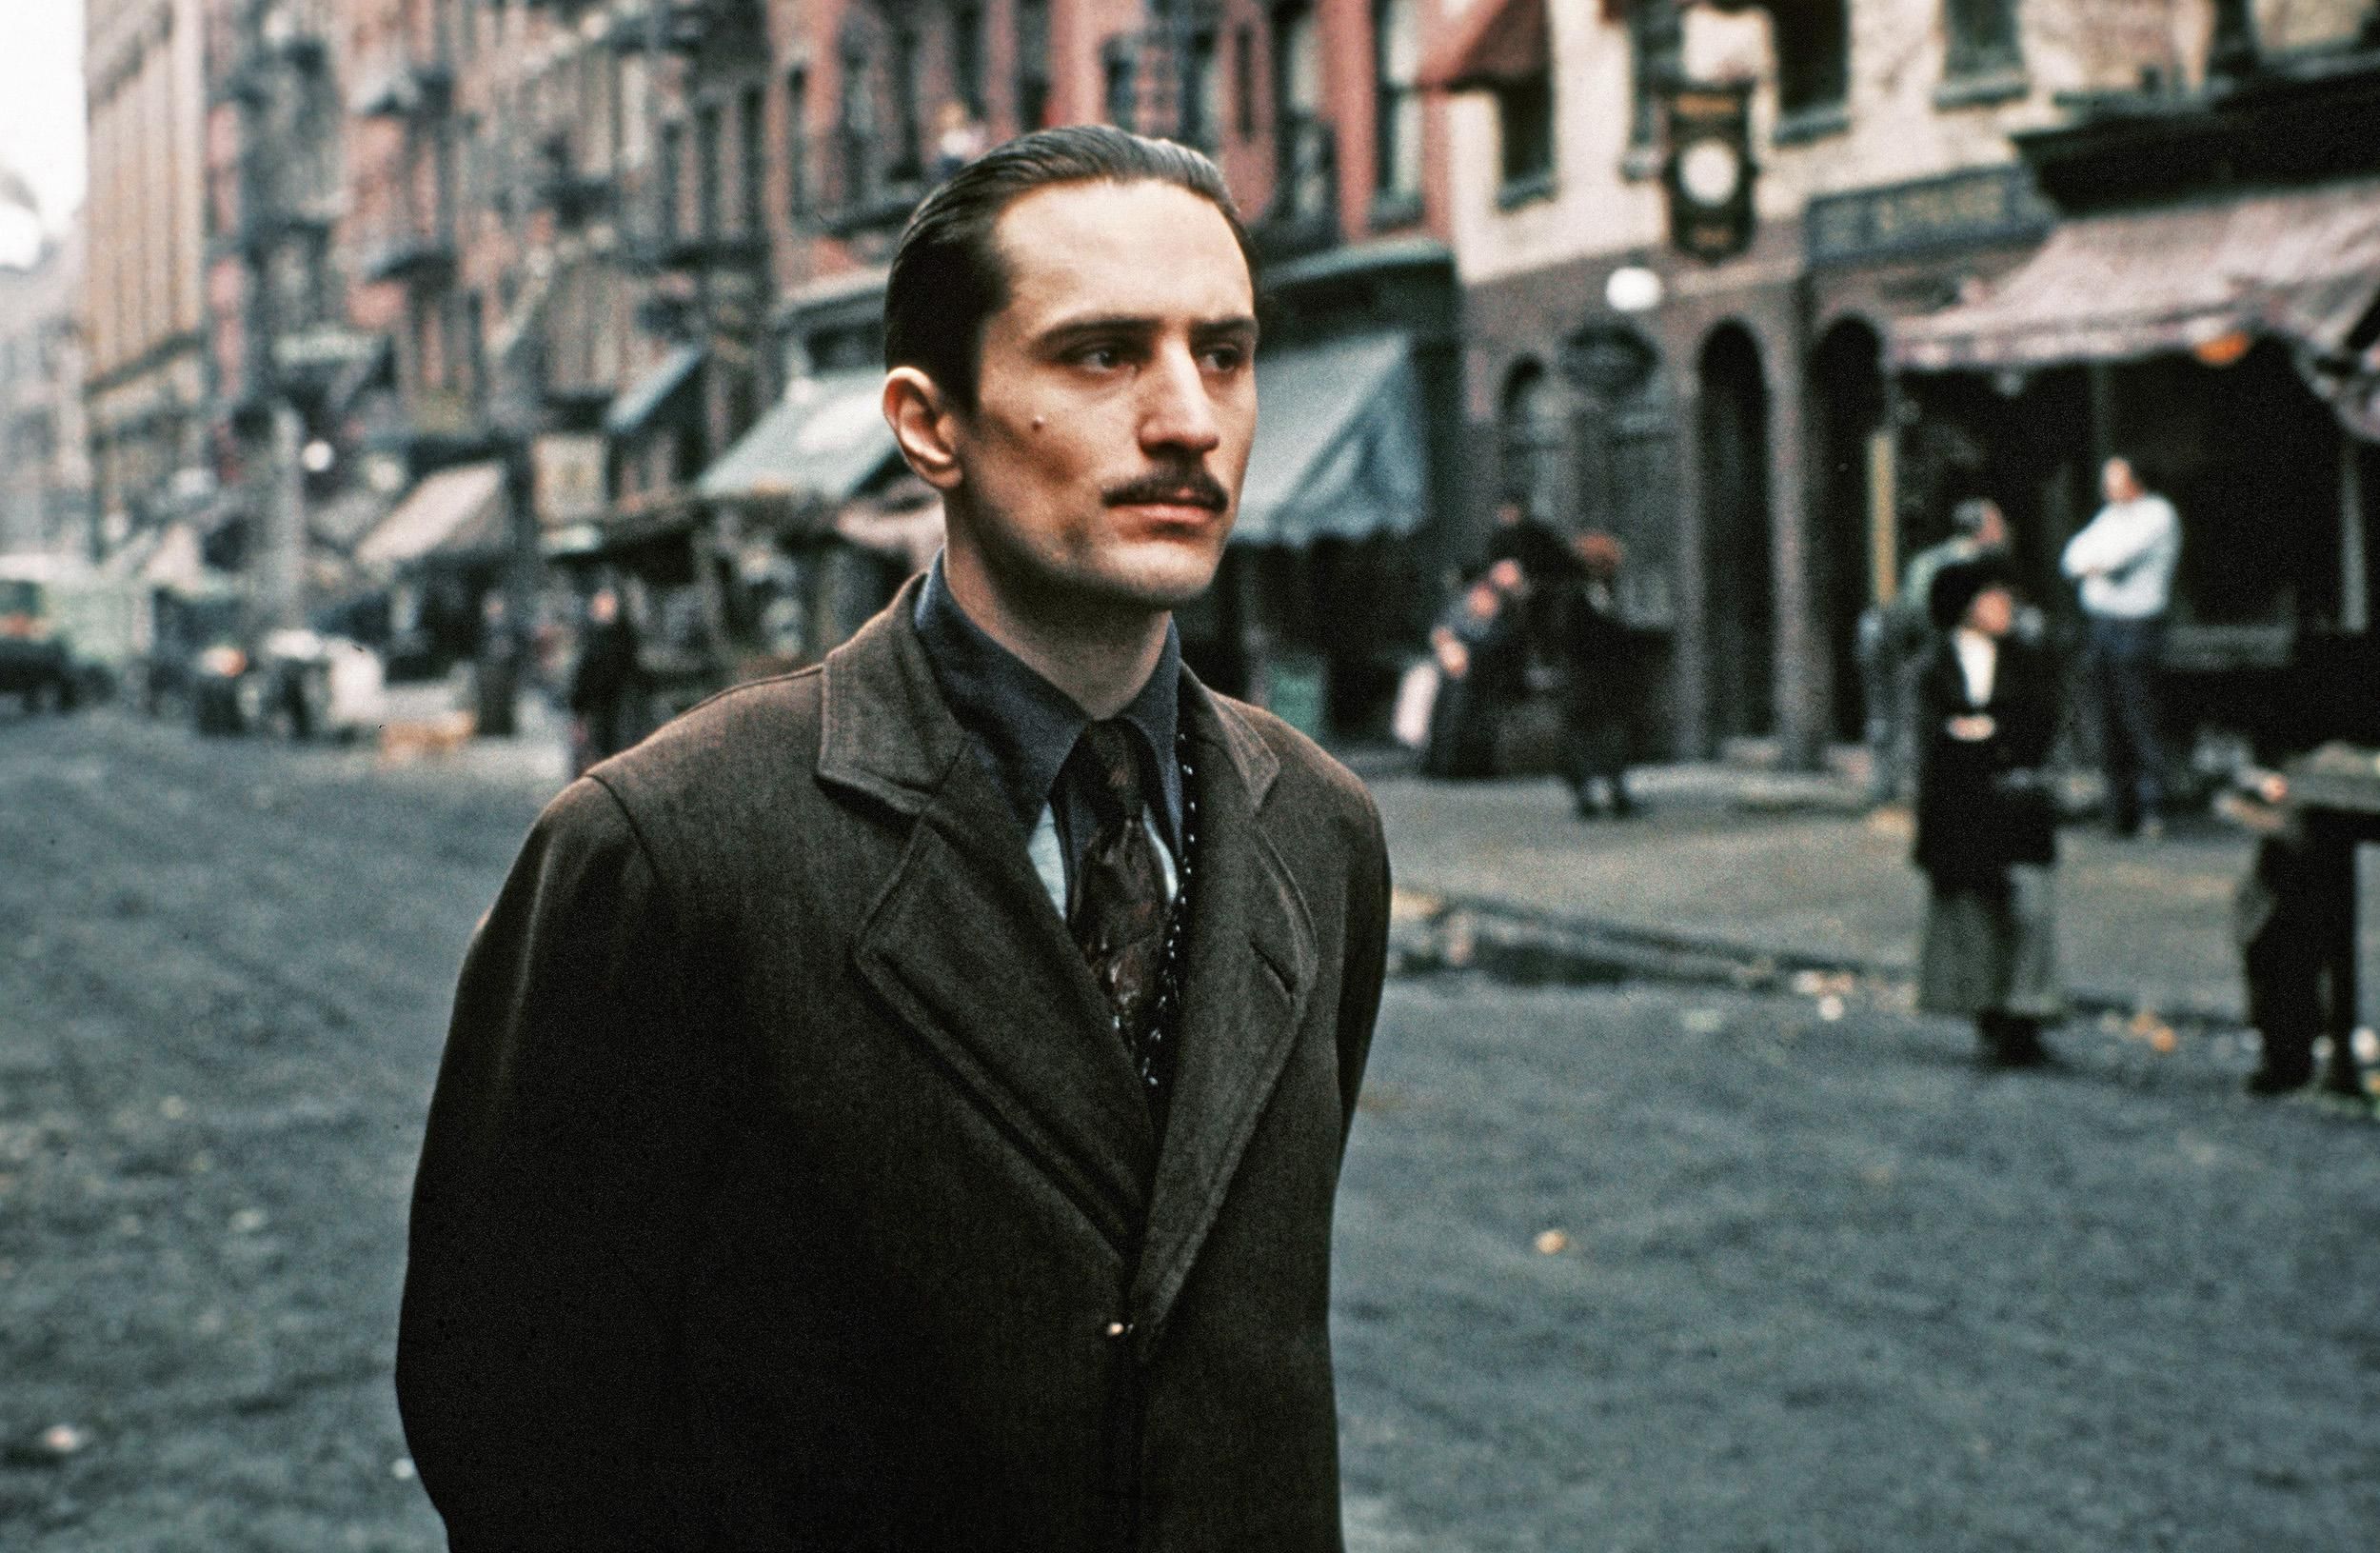 Robert De Niro as young Vito Corleone stands on a street in Little Italy in a scene from the Godfather Part II